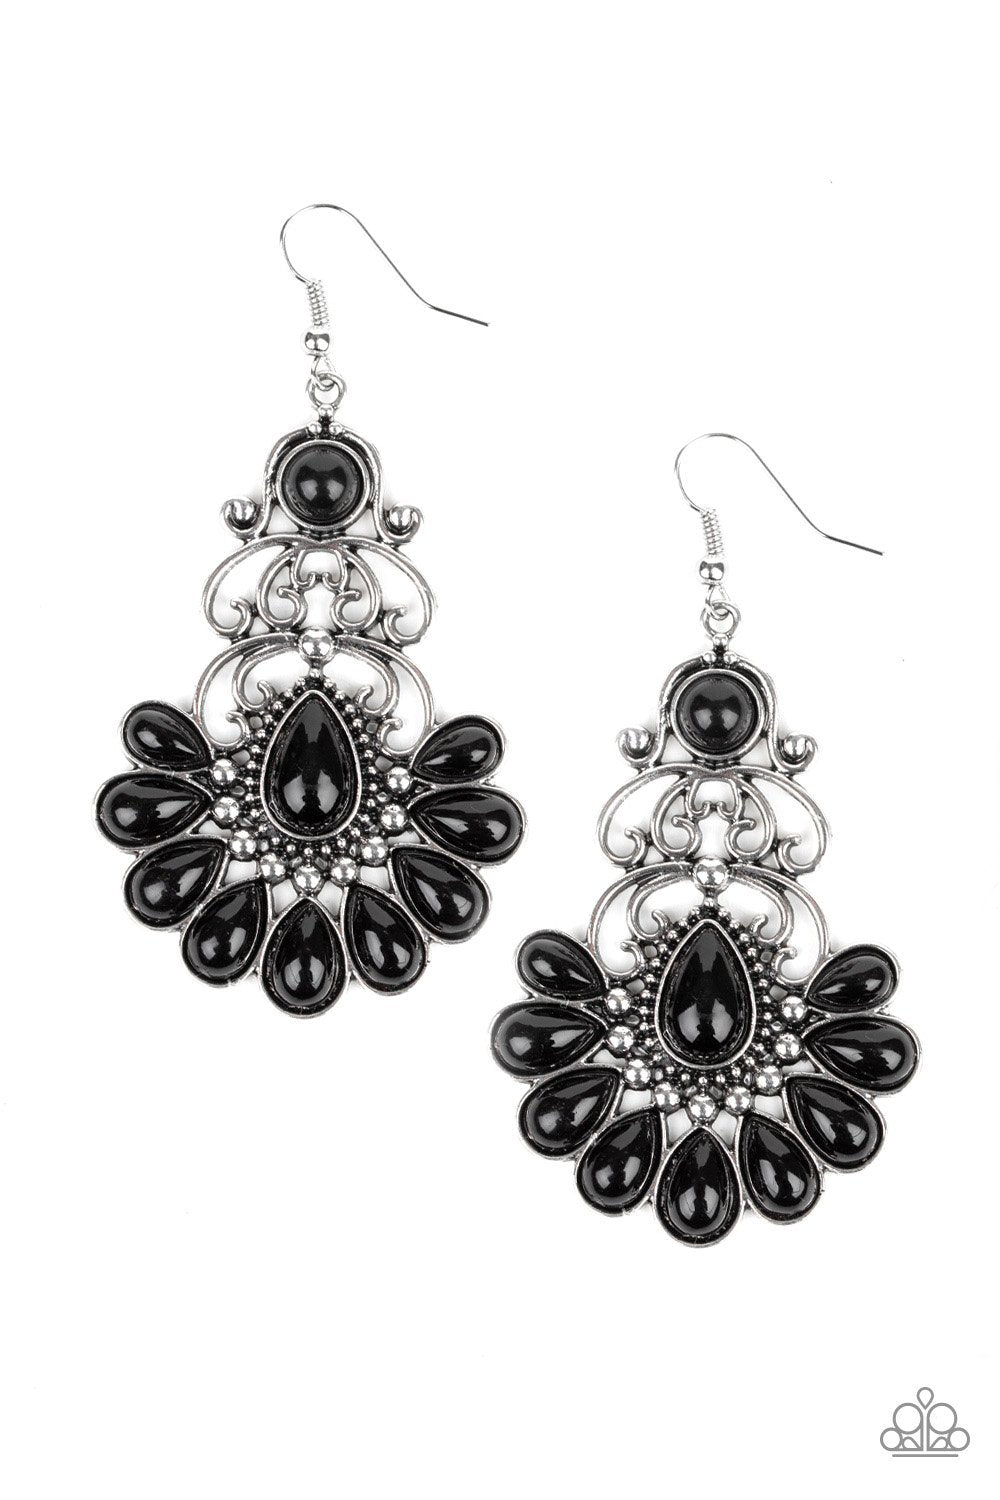 Paradise Parlor Black and Silver Earrings - Paparazzi Accessories - lightbox -CarasShop.com - $5 Jewelry by Cara Jewels